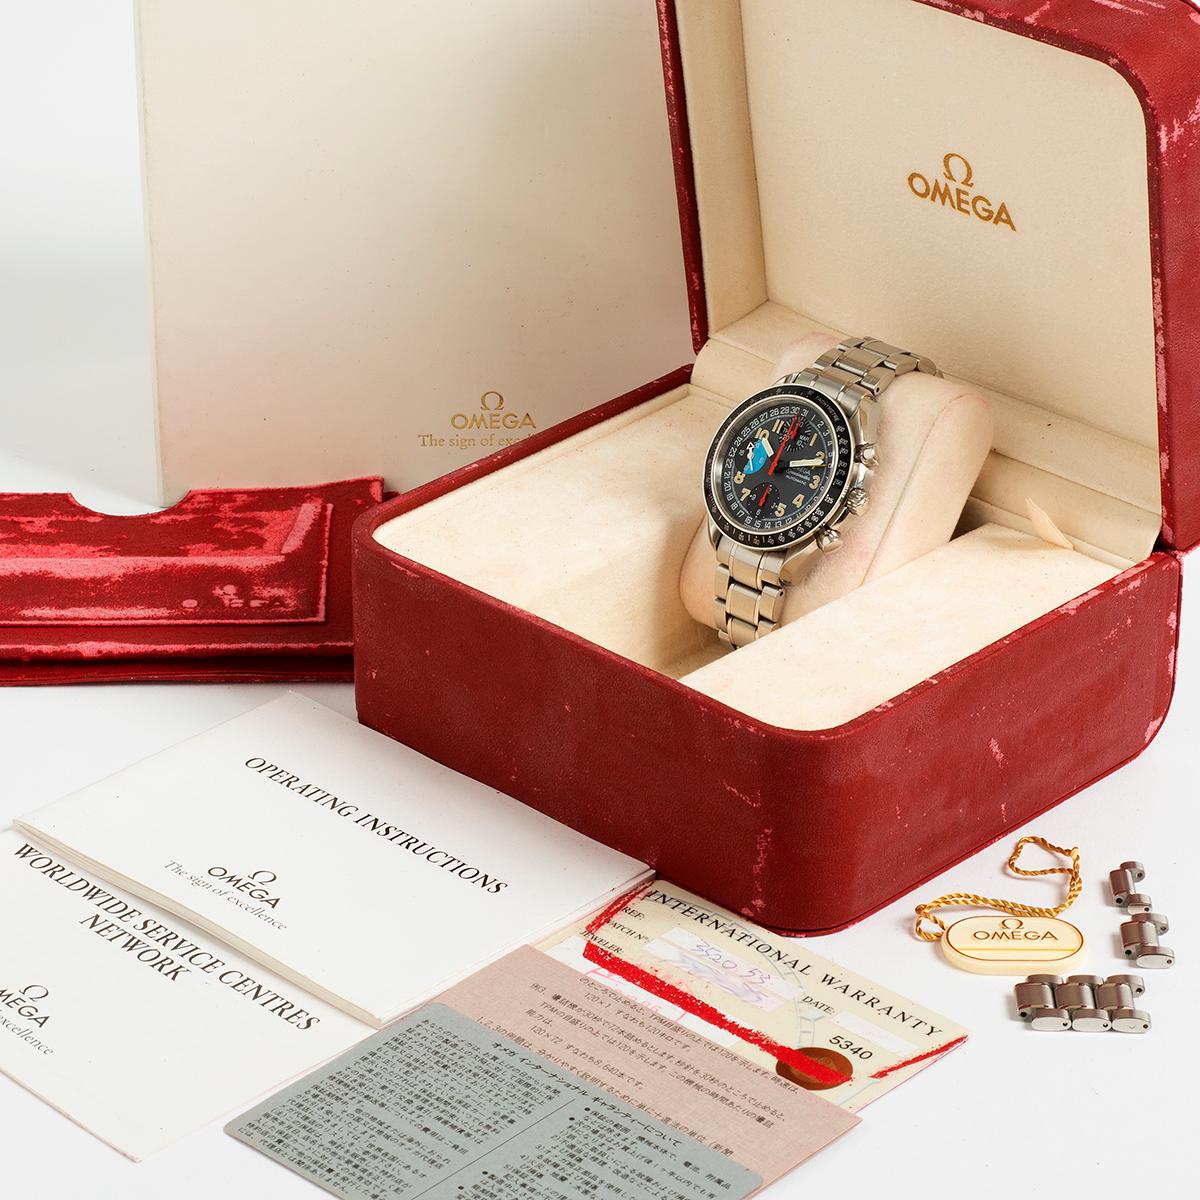 The iconic Omega Speedmaster Triple Date (reference 3520.53.00) is well known under various monikers: as the reduced size Speedmaster Mk40, the Schumacher (as Michael Schumacher was featured extensively in the advertising of this watch) and the Ben